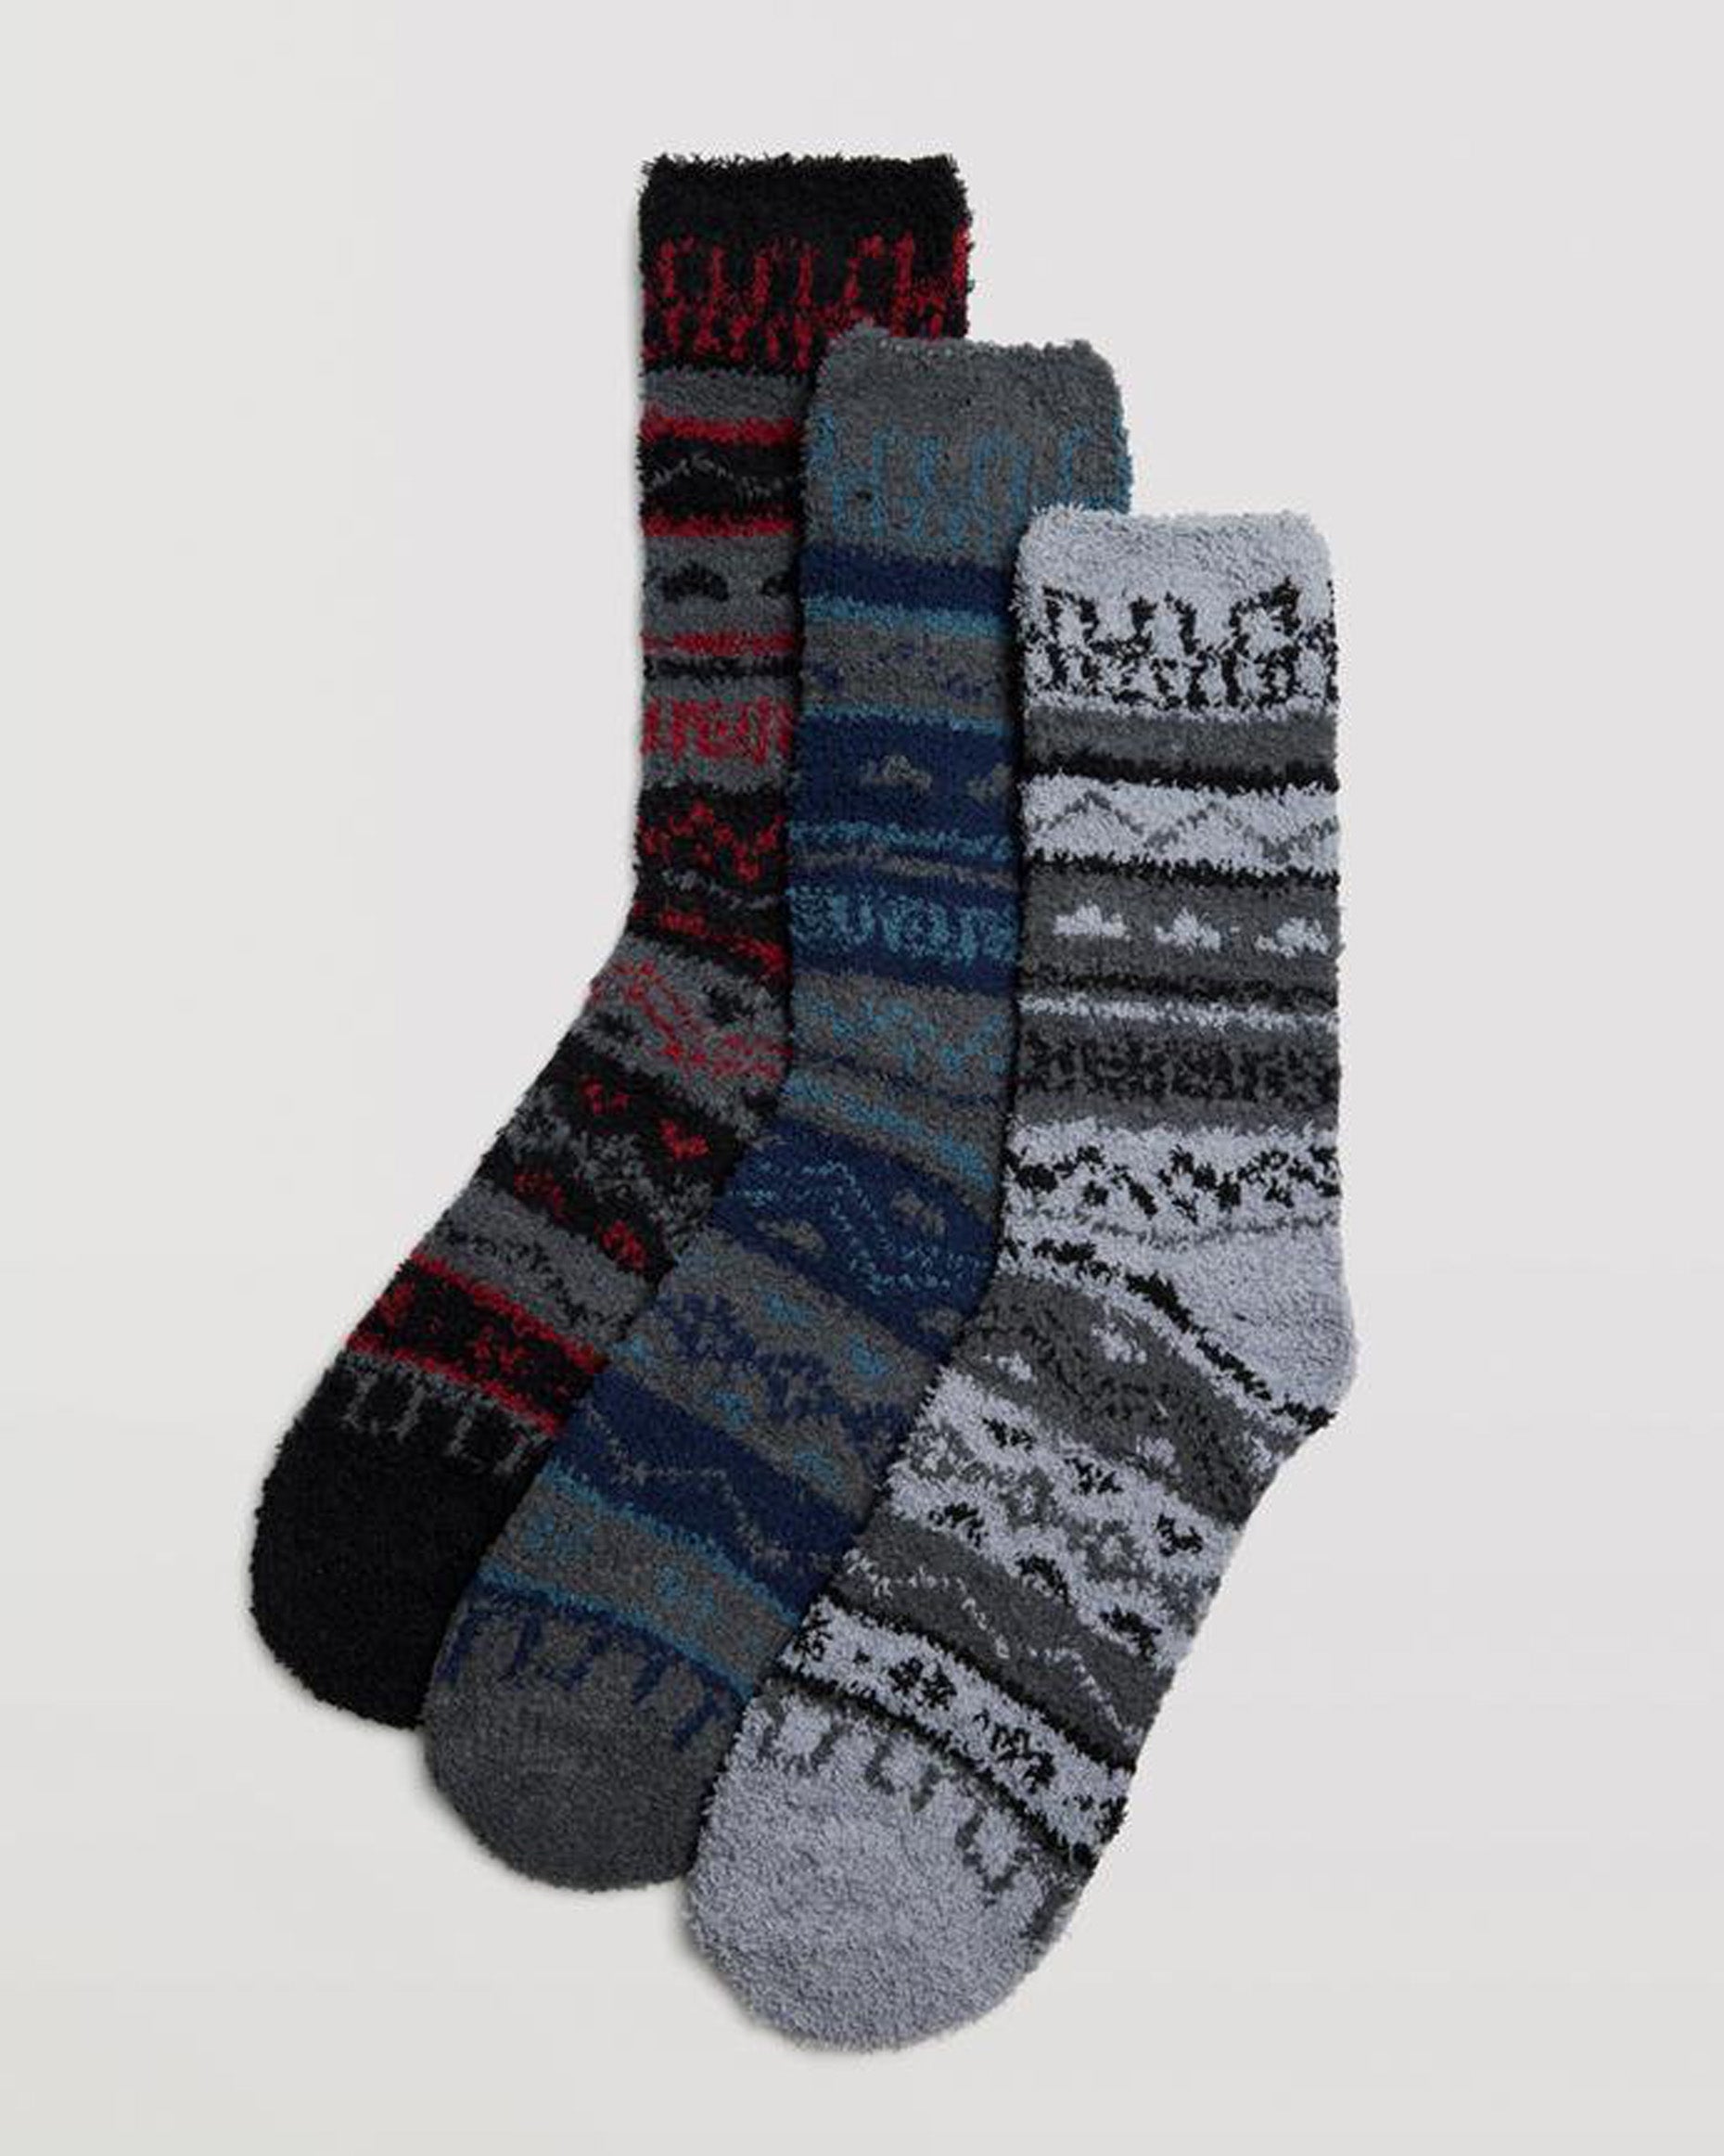 Ysabel Mora 22892 Aztec Flannel Socks - Men's soft and fluffy light grey Aztec style patterned bed thermal socks in different colours.